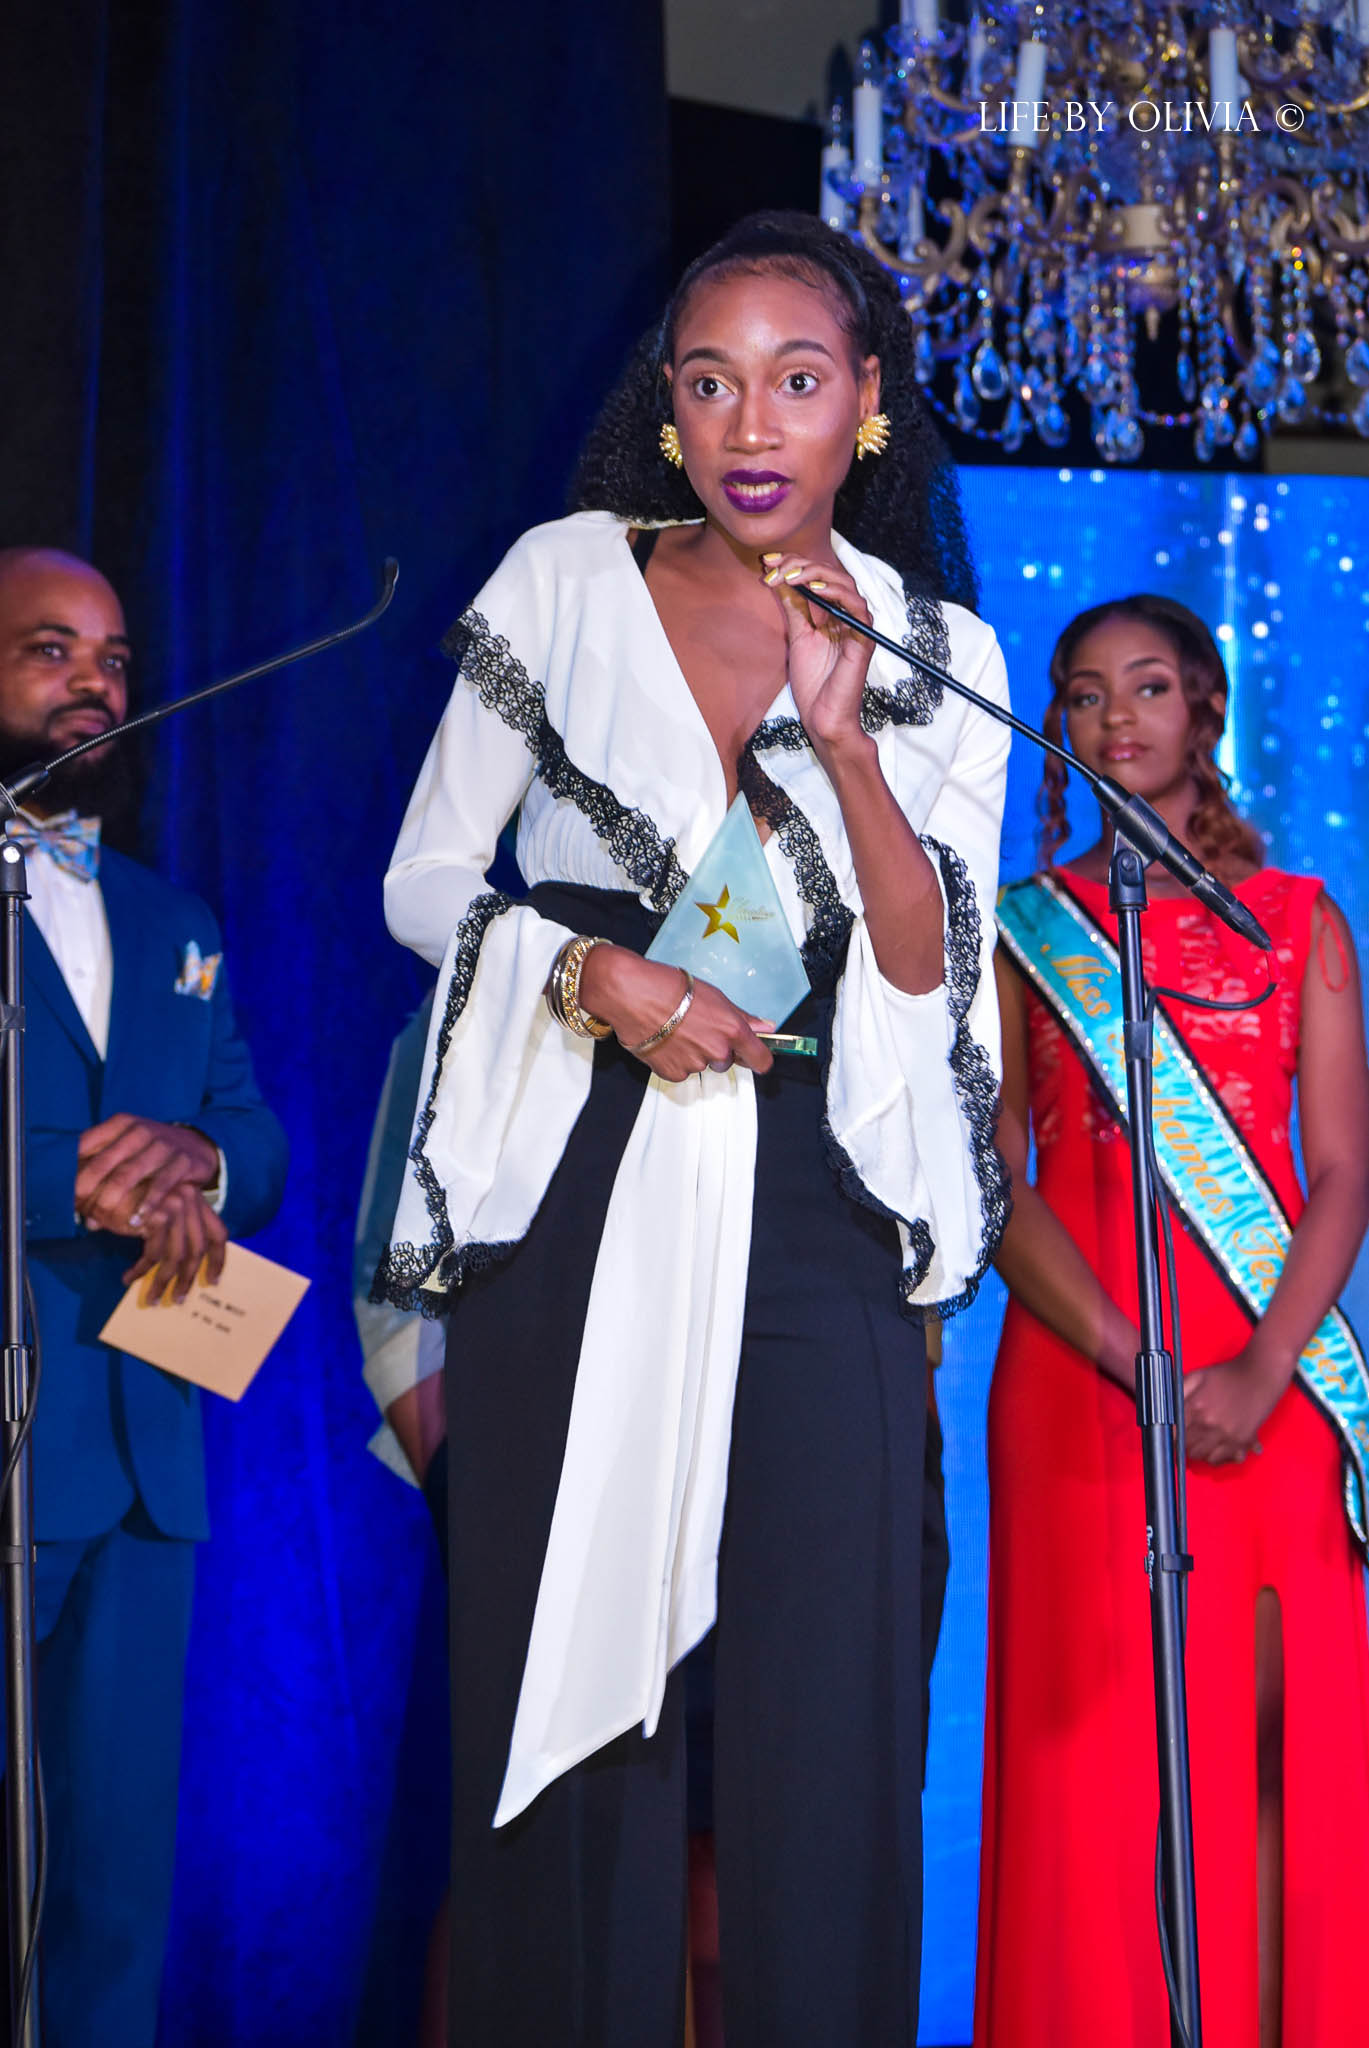 The Elevation Awards – The Premiere Bahamian Entertainment Awards Show